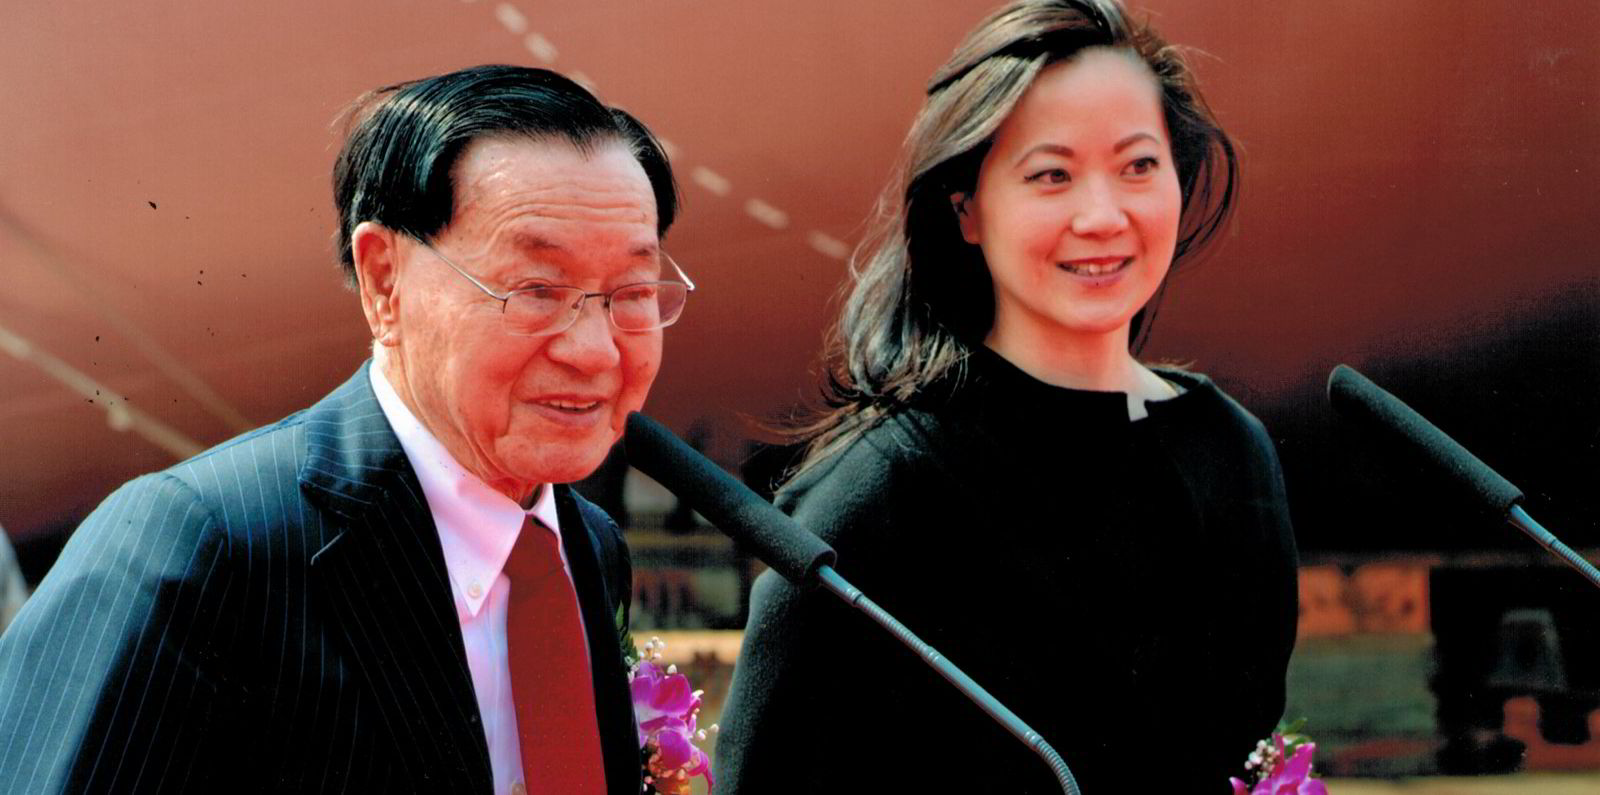 Angela Chow dies in car crash as Foremost Group mourns ‘charismatic and visionary’ leader.